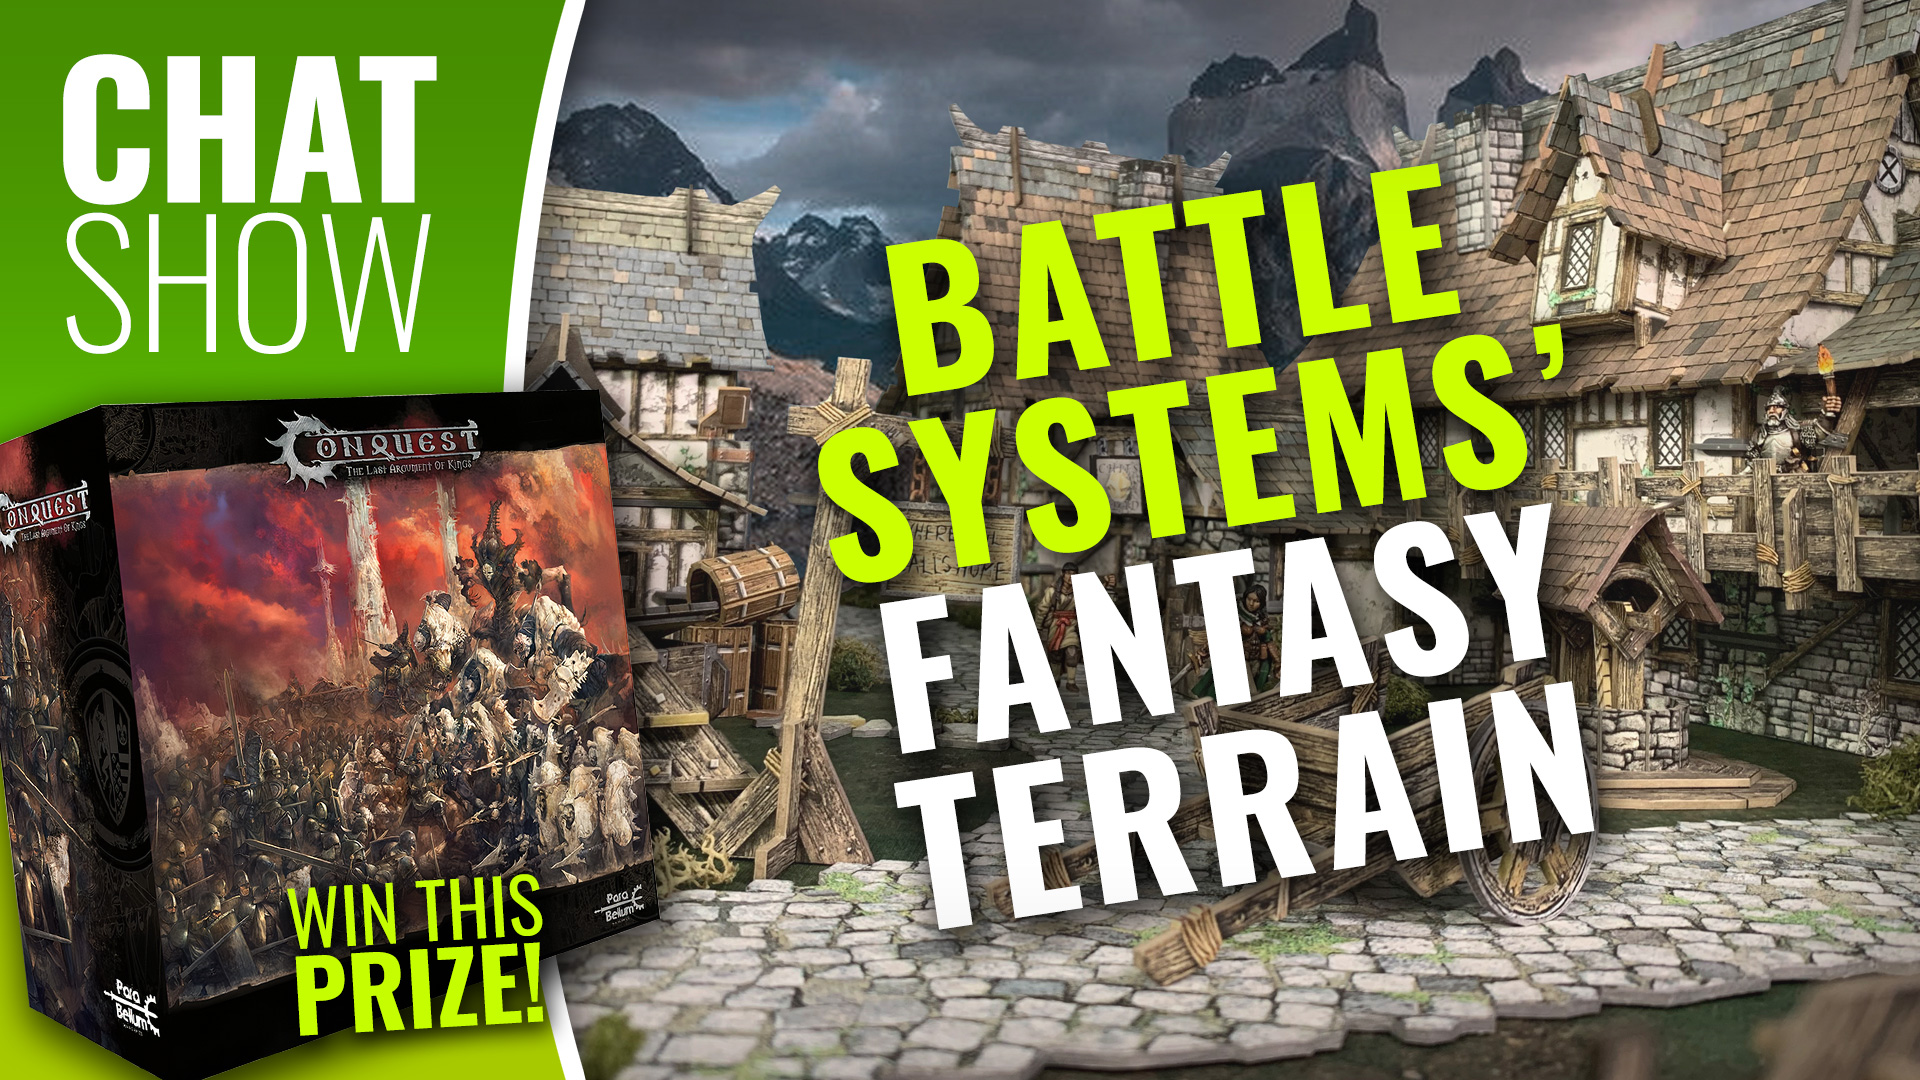 Weekender Battle Systems Fantastic Fantasy Terrain Win Conquest Two Player Set Ontabletop Home Of Beasts Of War - brawl stars kinderspiel